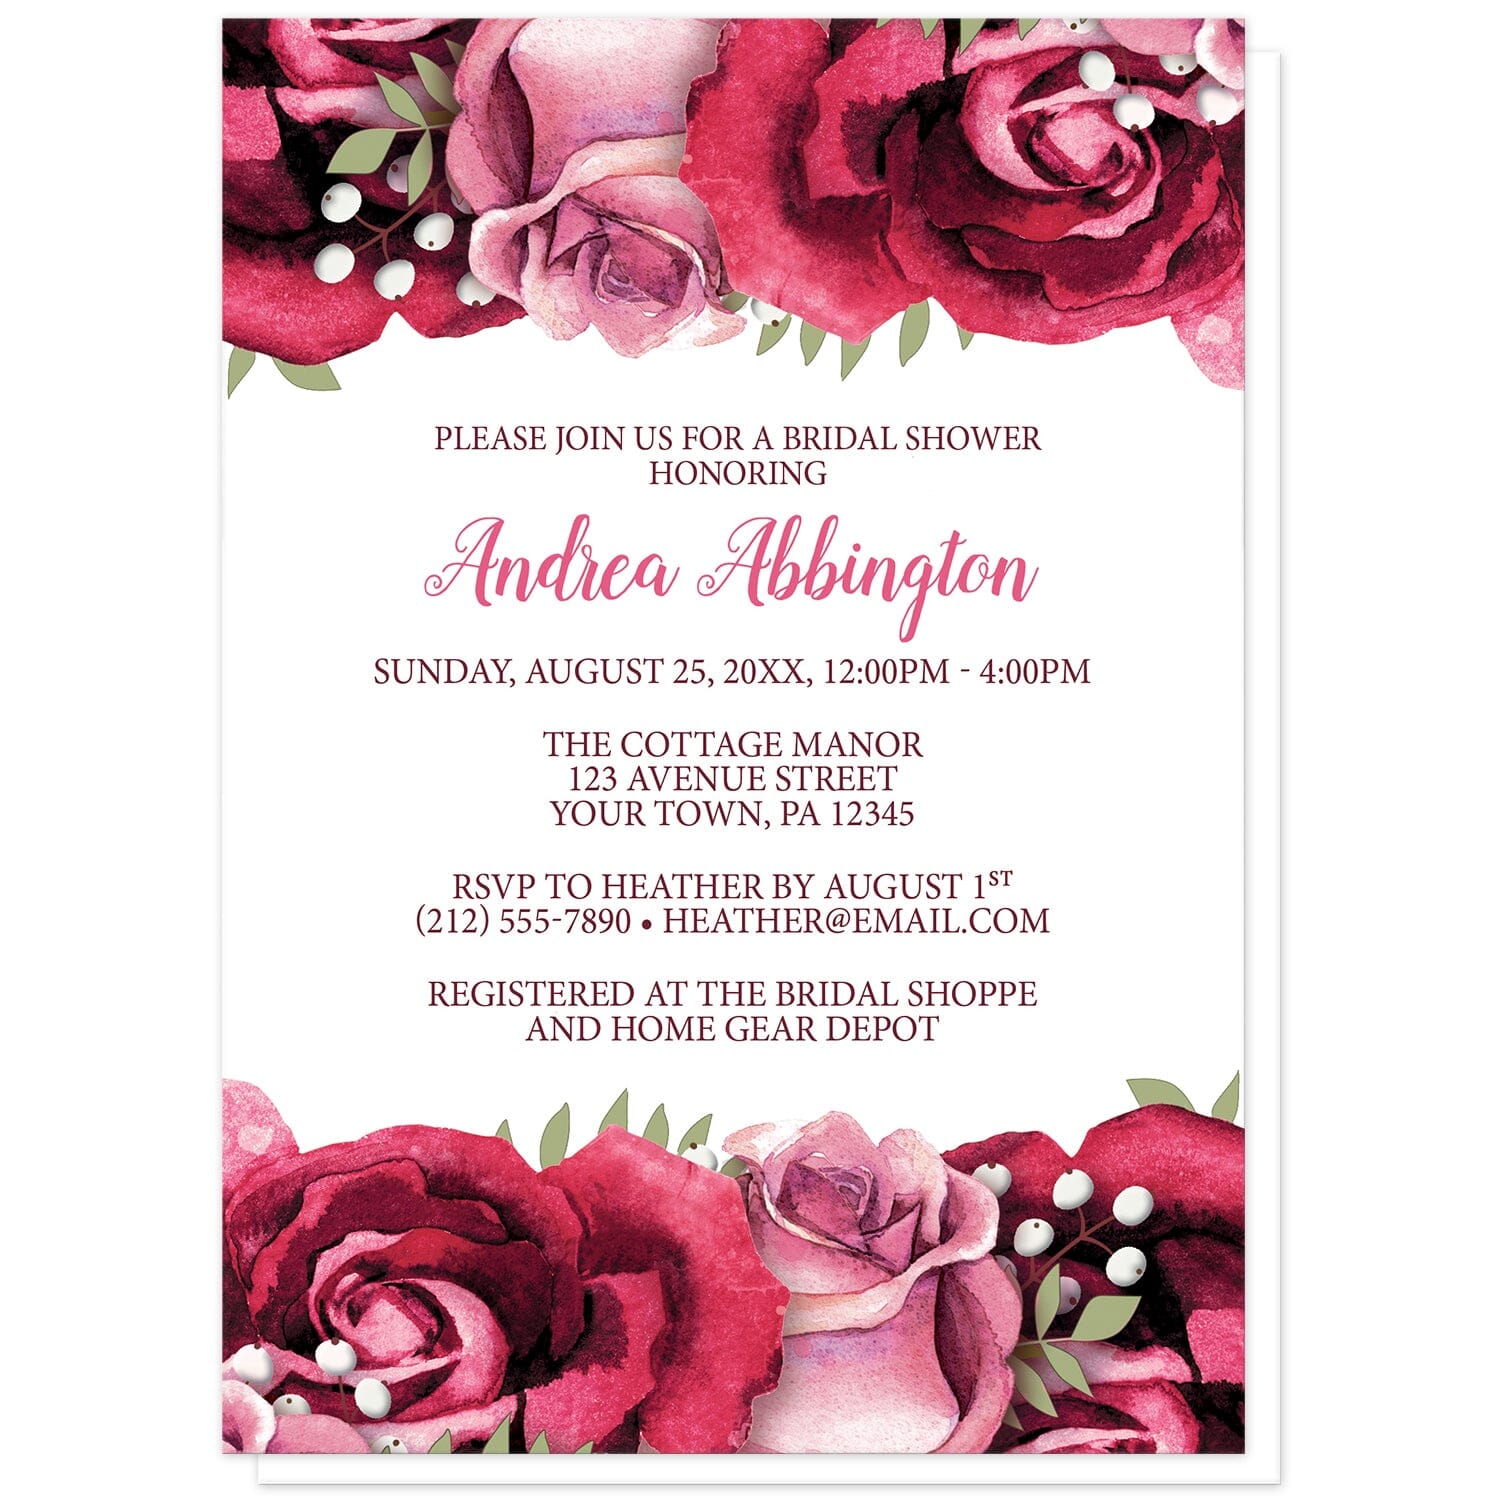 Rustic Burgundy Pink Rose White Bridal Shower Invitations at Artistically Invited. Rustic burgundy pink rose white bridal shower invitations with beautiful burgundy red and pink roses along the top and bottom over a white background. Your personalized bridal shower celebration details are custom printed in light and dark burgundy on white in the center between the roses.